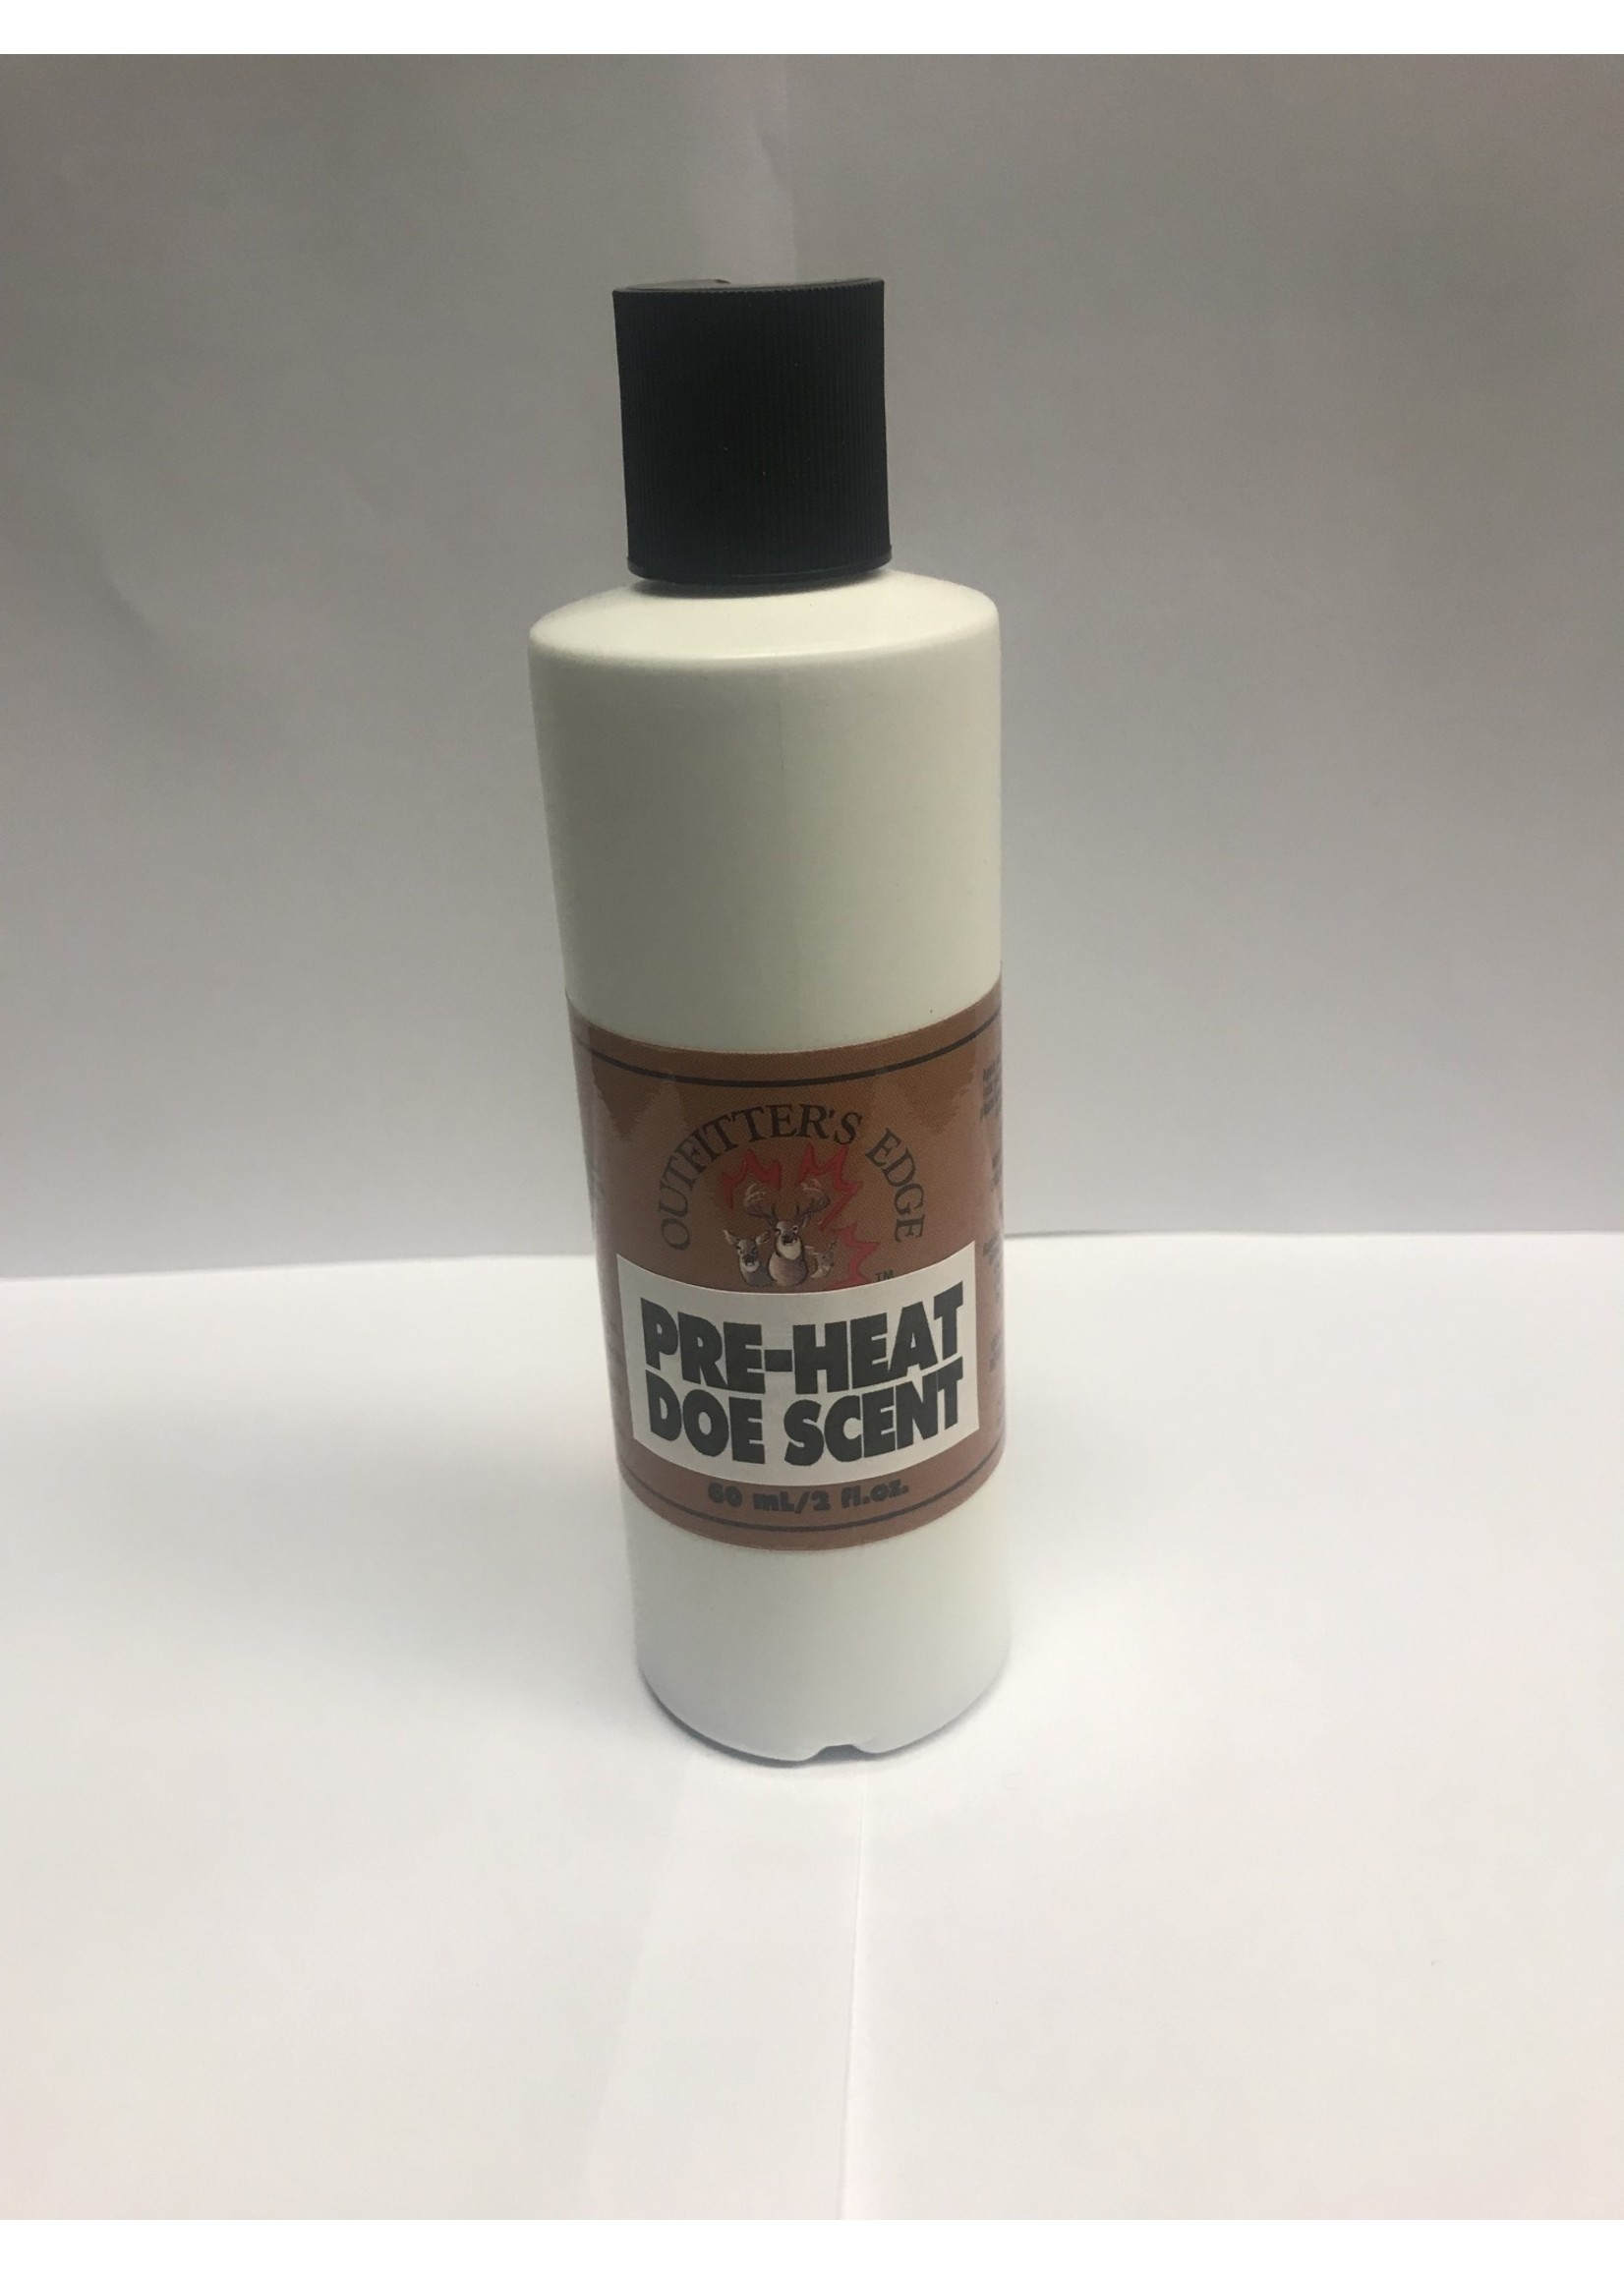 OUTFITTERS EDGE OUTFITTERS EDGE PRE HEAT DOE SCENT 8 oz